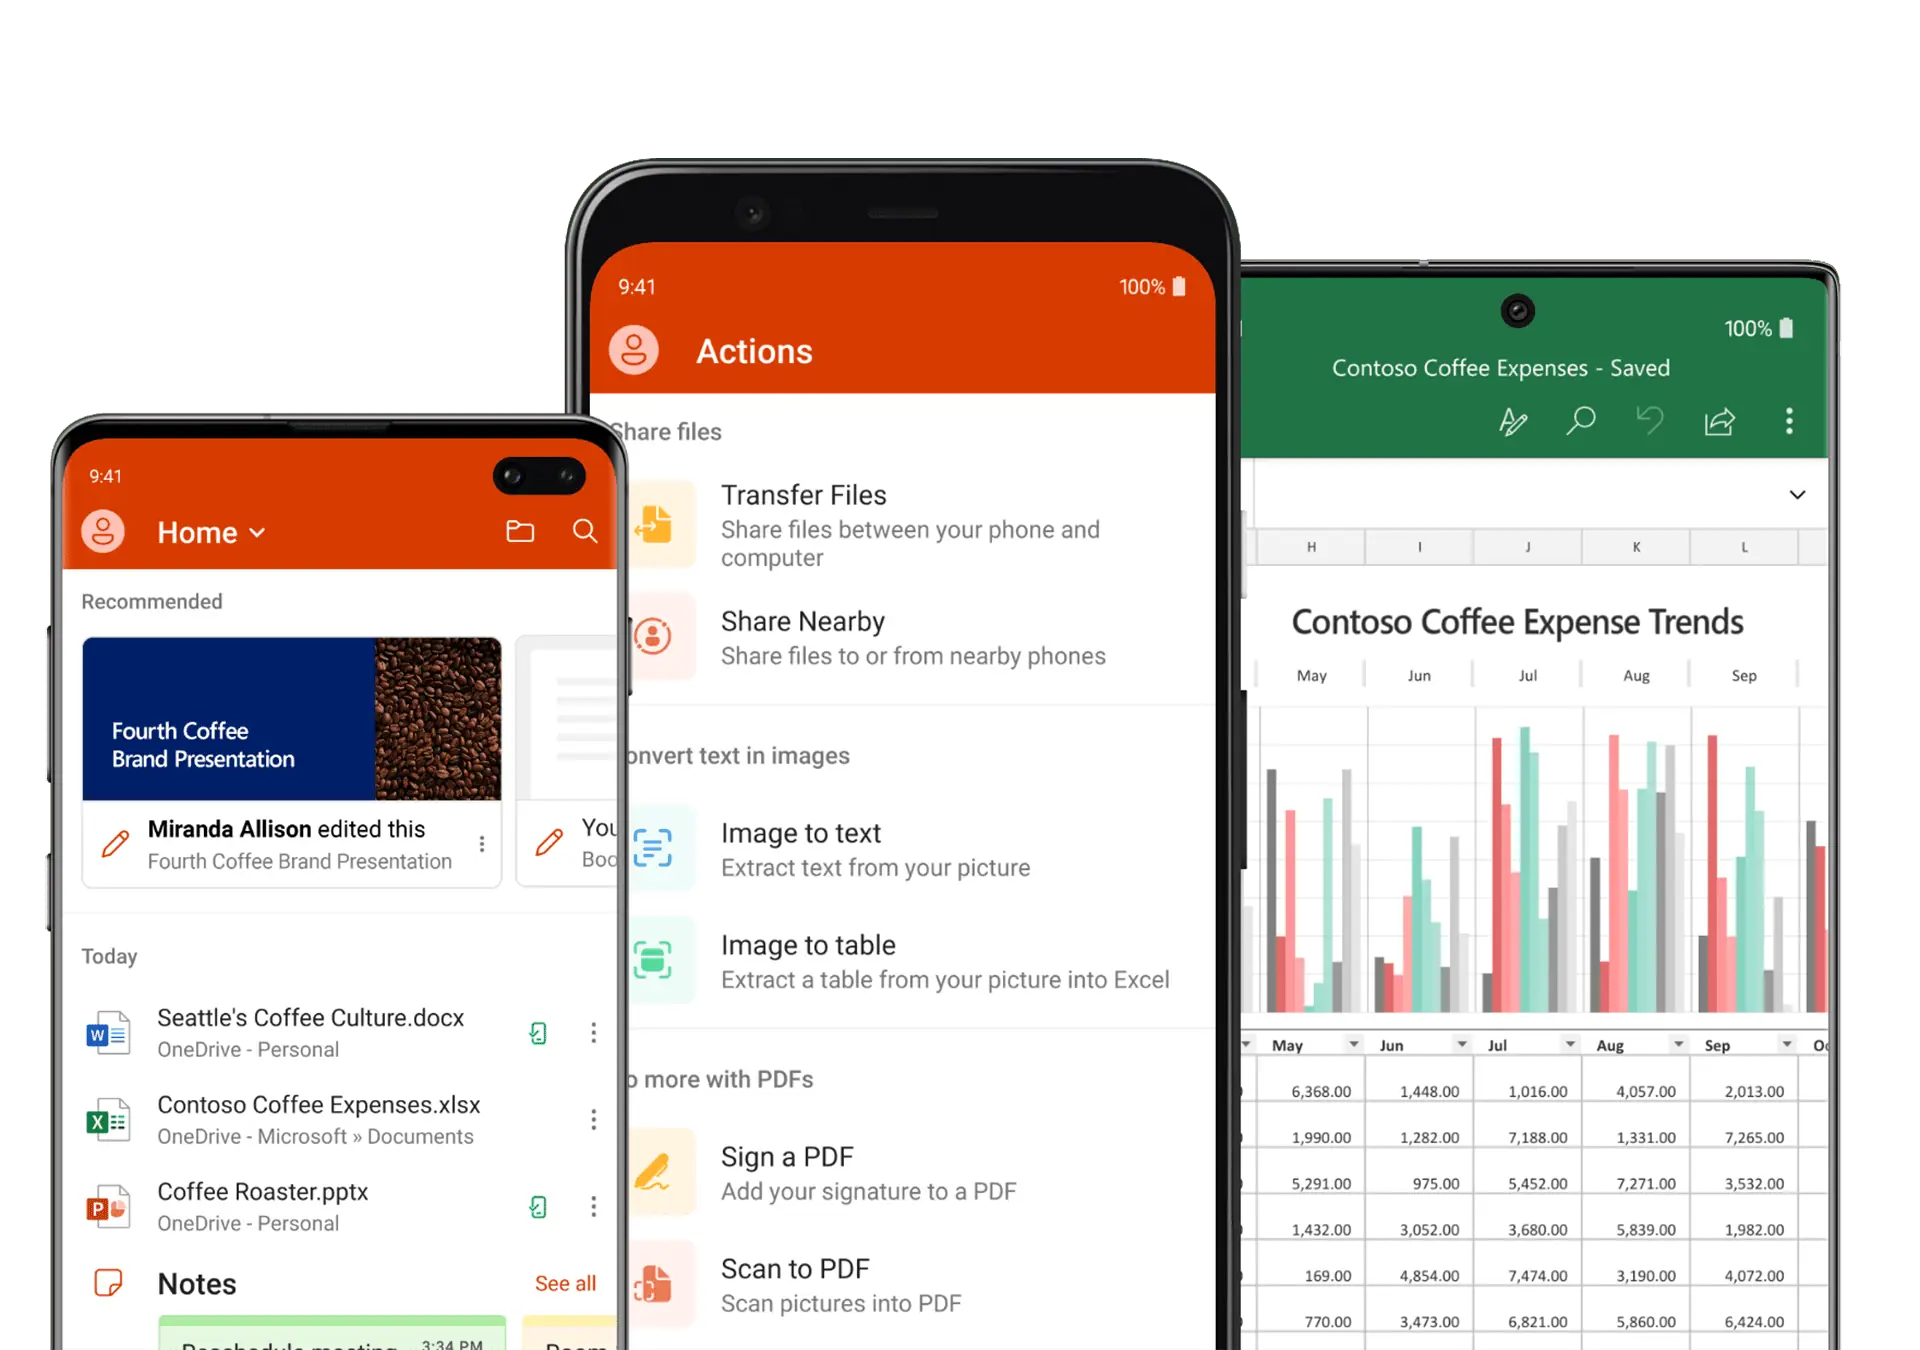 Microsoft brings new features to Office apps for Android and iOS users